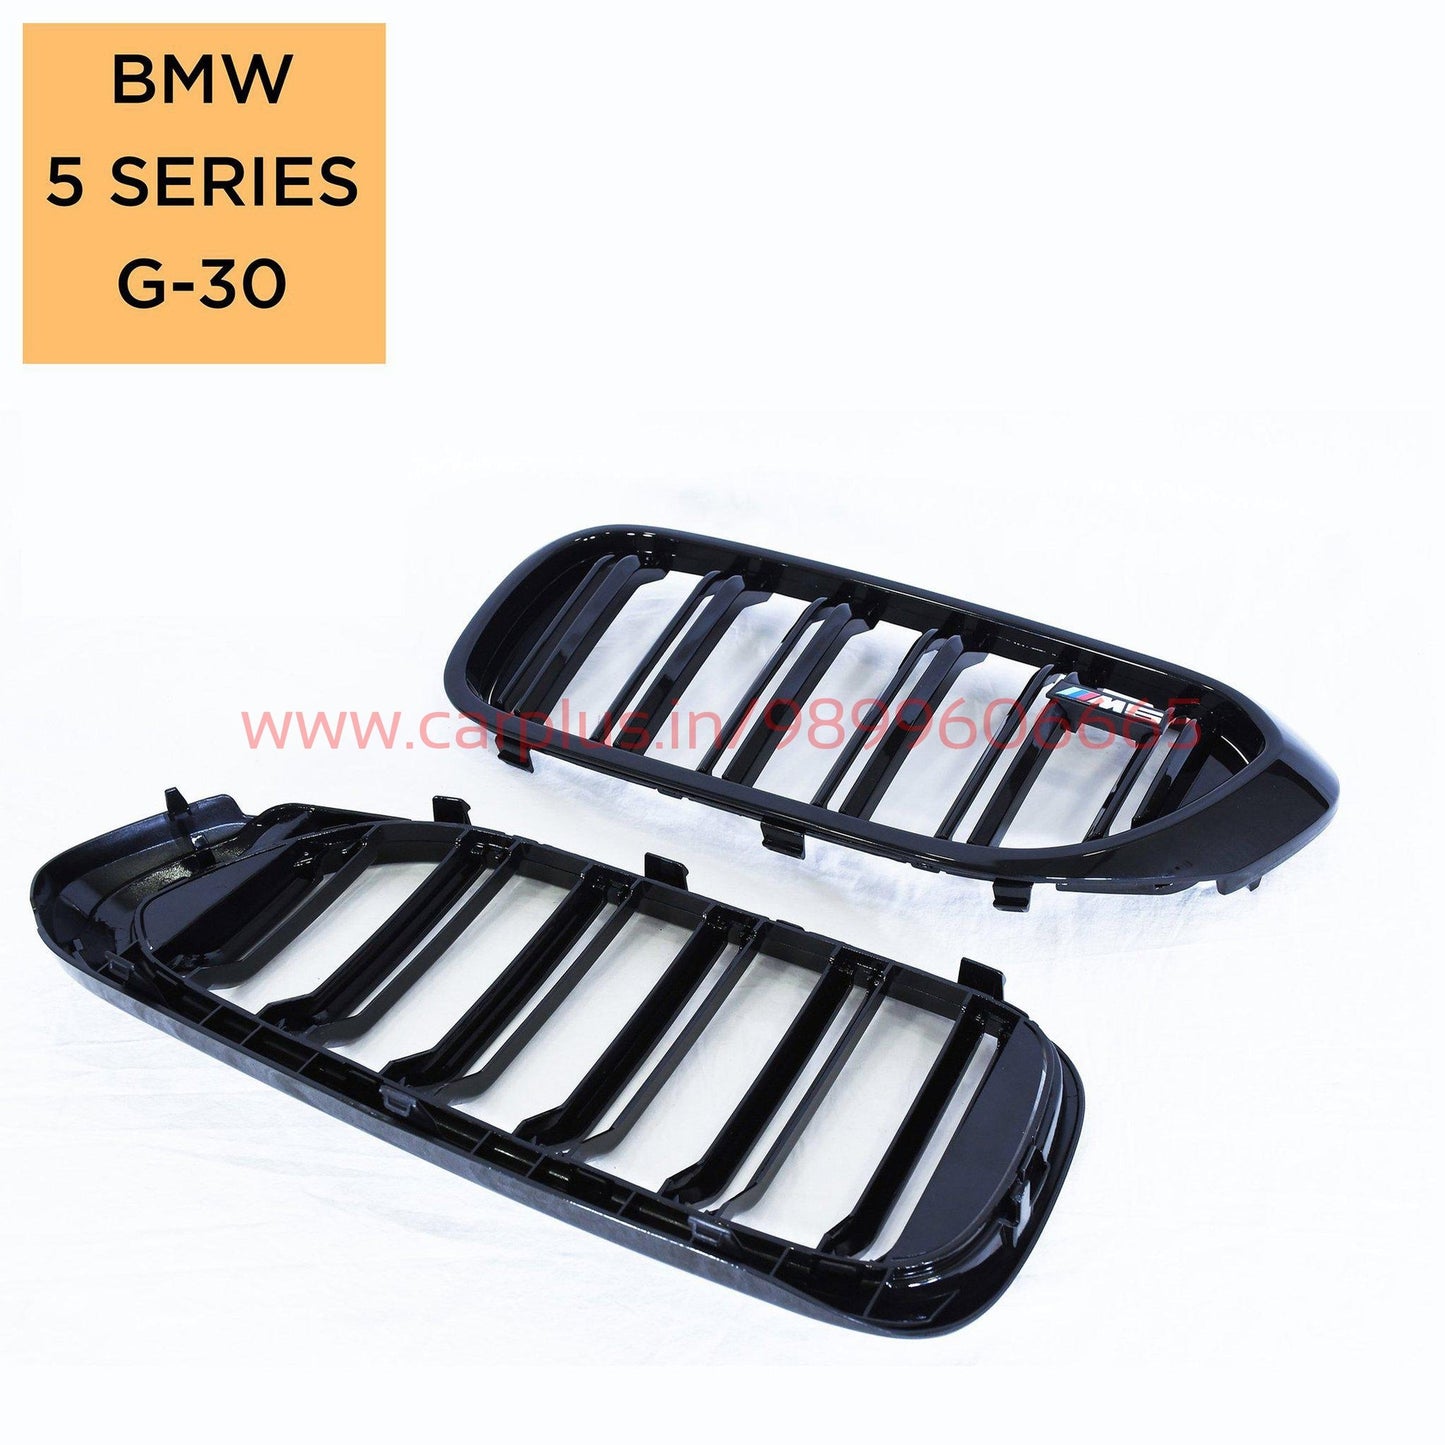 
                  
                    KMH Black Kidney Grill for BMW 5 Series G-30 KMH-GRILLS GRILLS.
                  
                